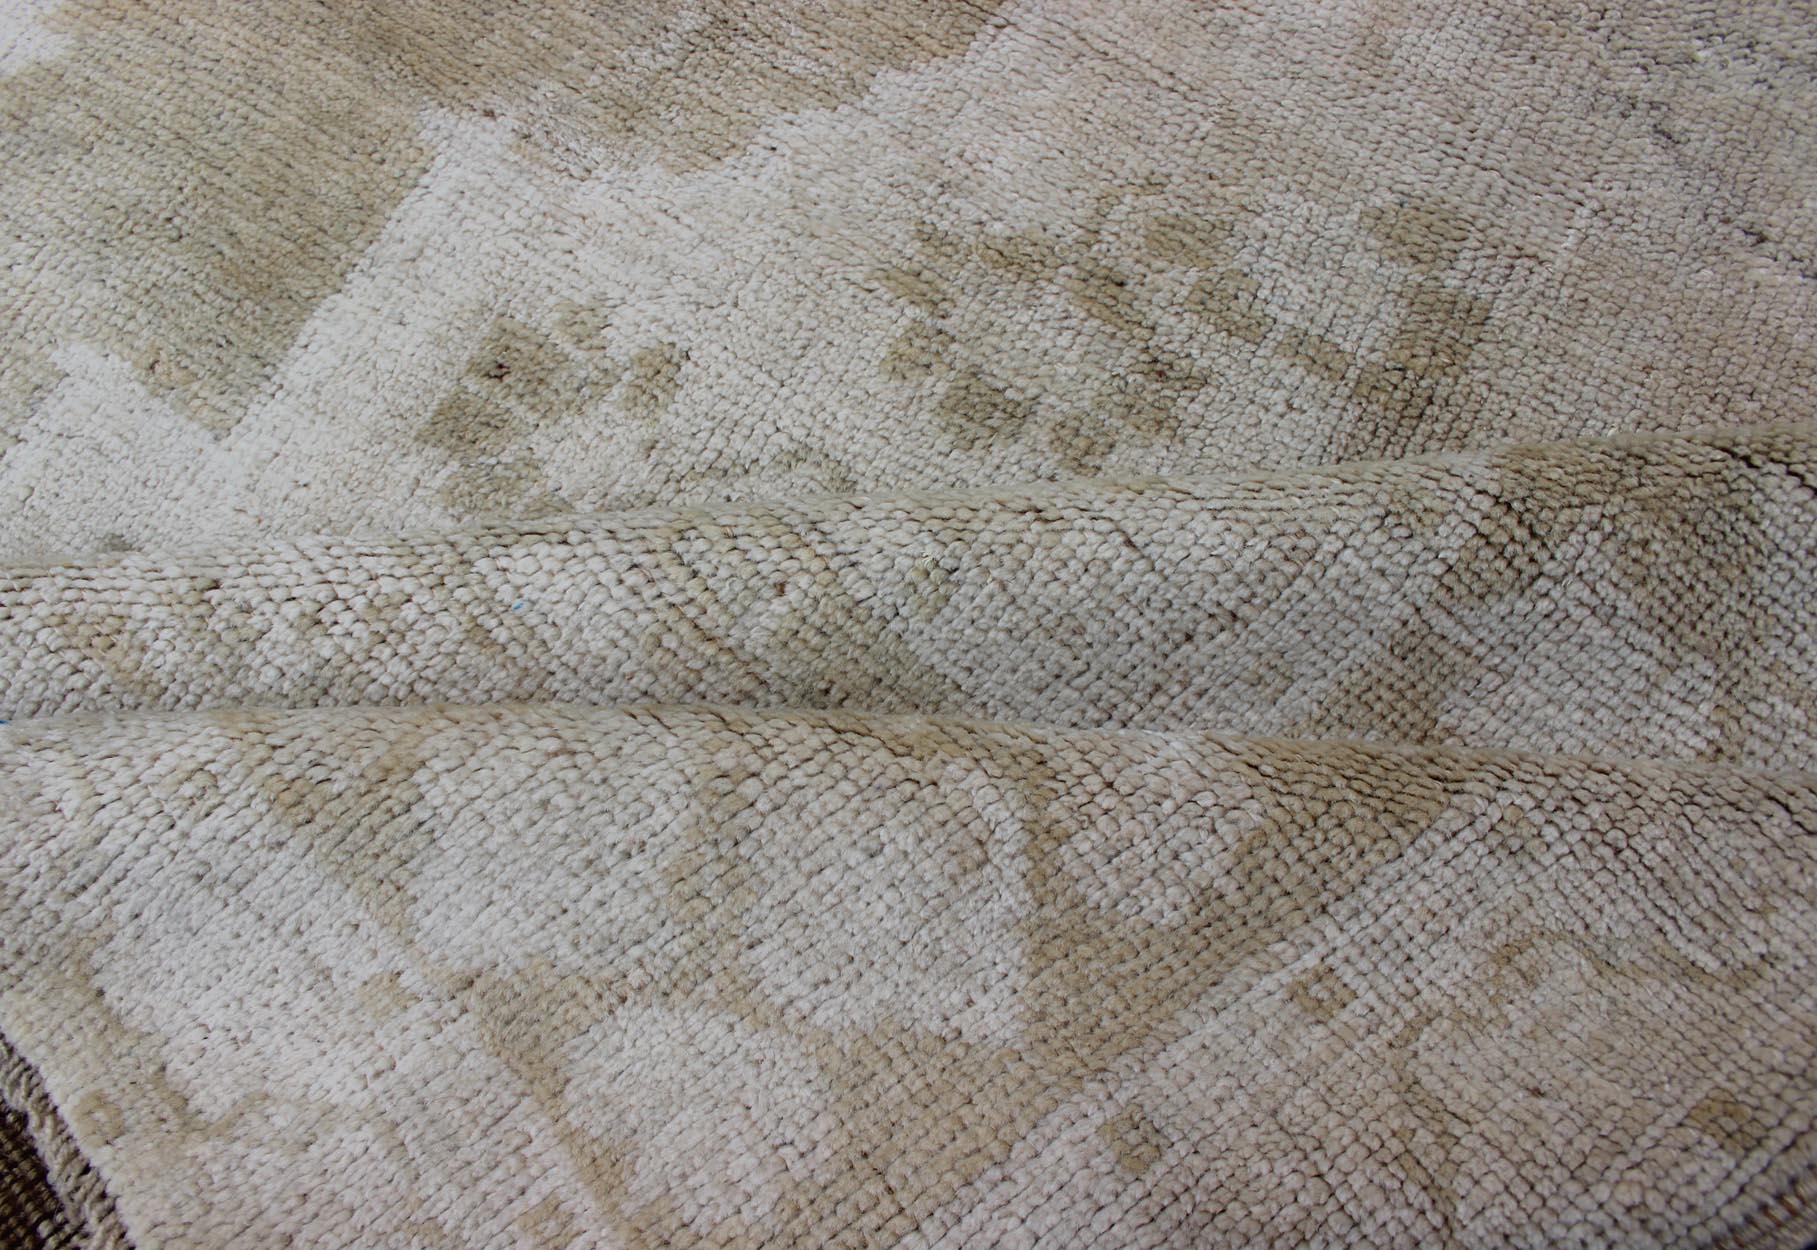 Medallion Design Vintage Oushak Rug in Muted Tones of Faded Yellow and Neutrals In Good Condition For Sale In Atlanta, GA